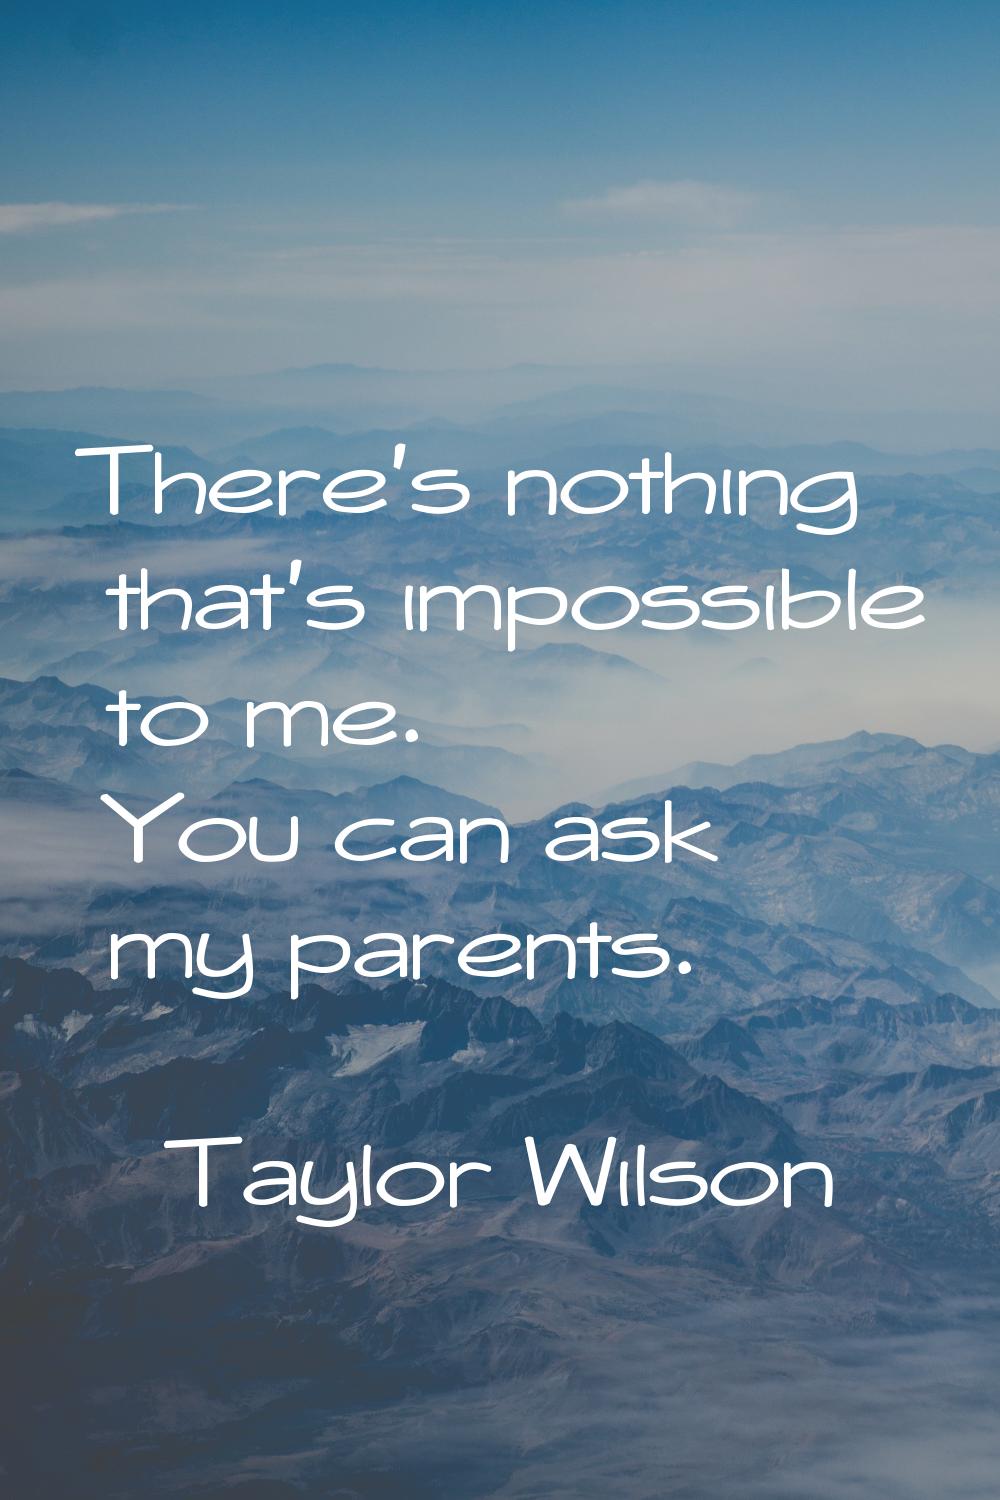 There's nothing that's impossible to me. You can ask my parents.